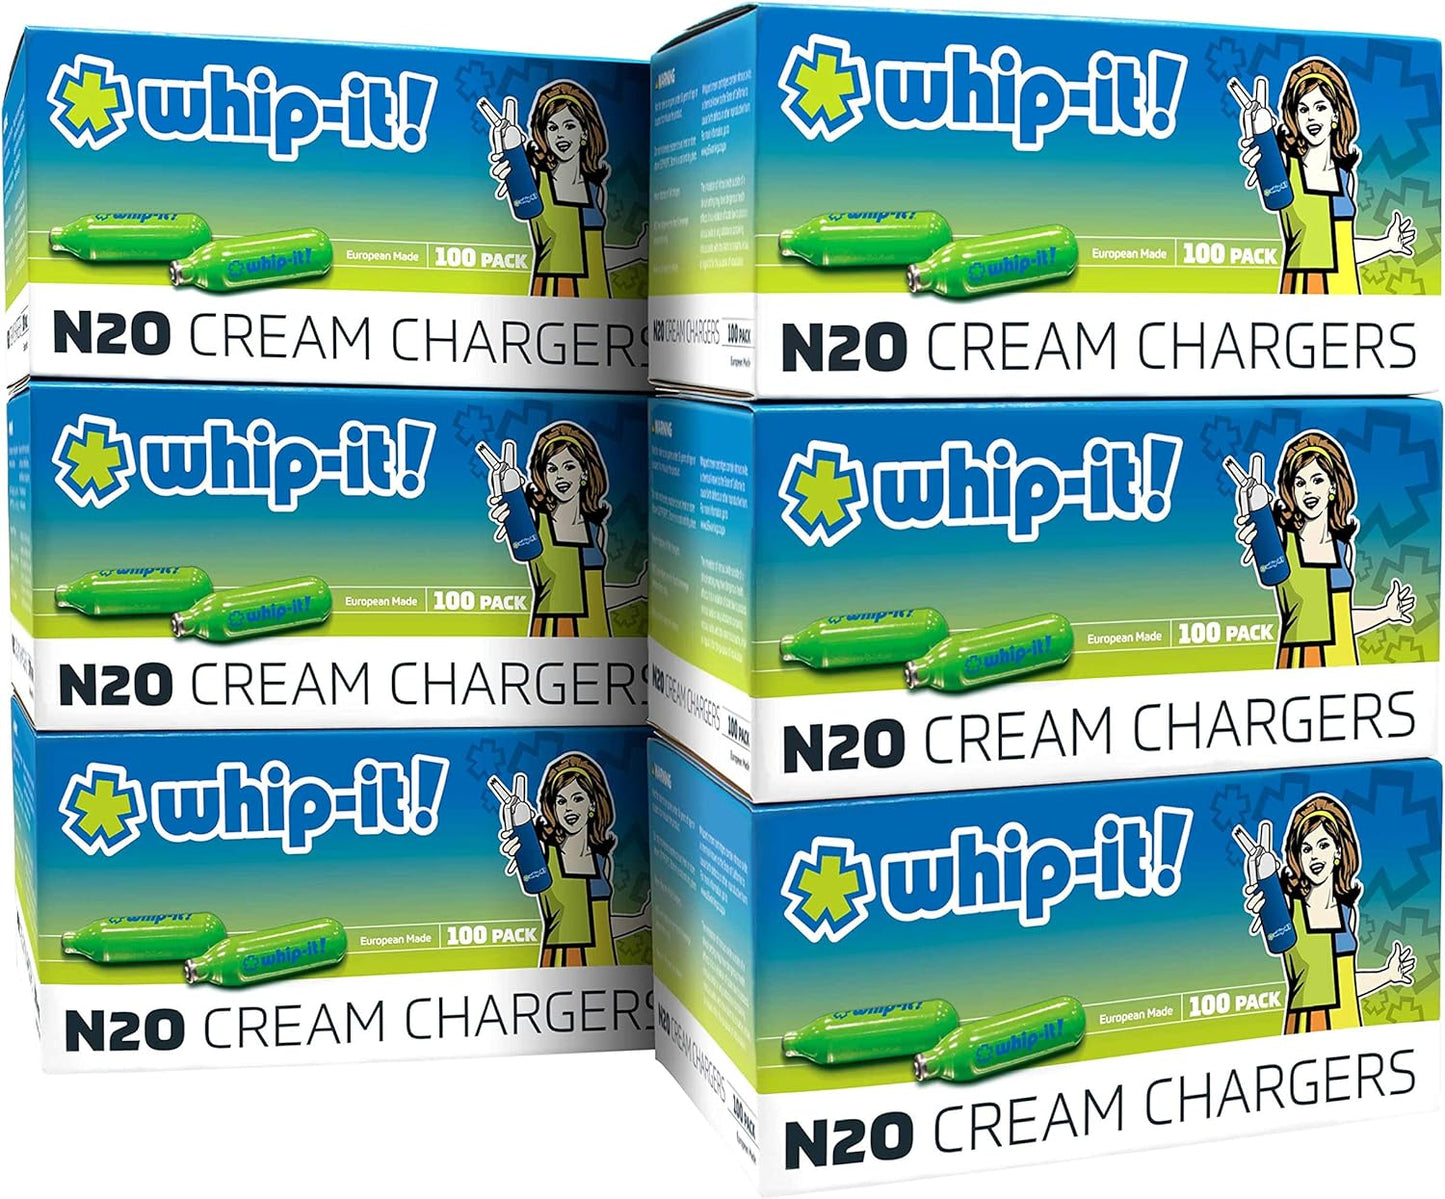 N20 Whip-It! Cream Chargers 50pk